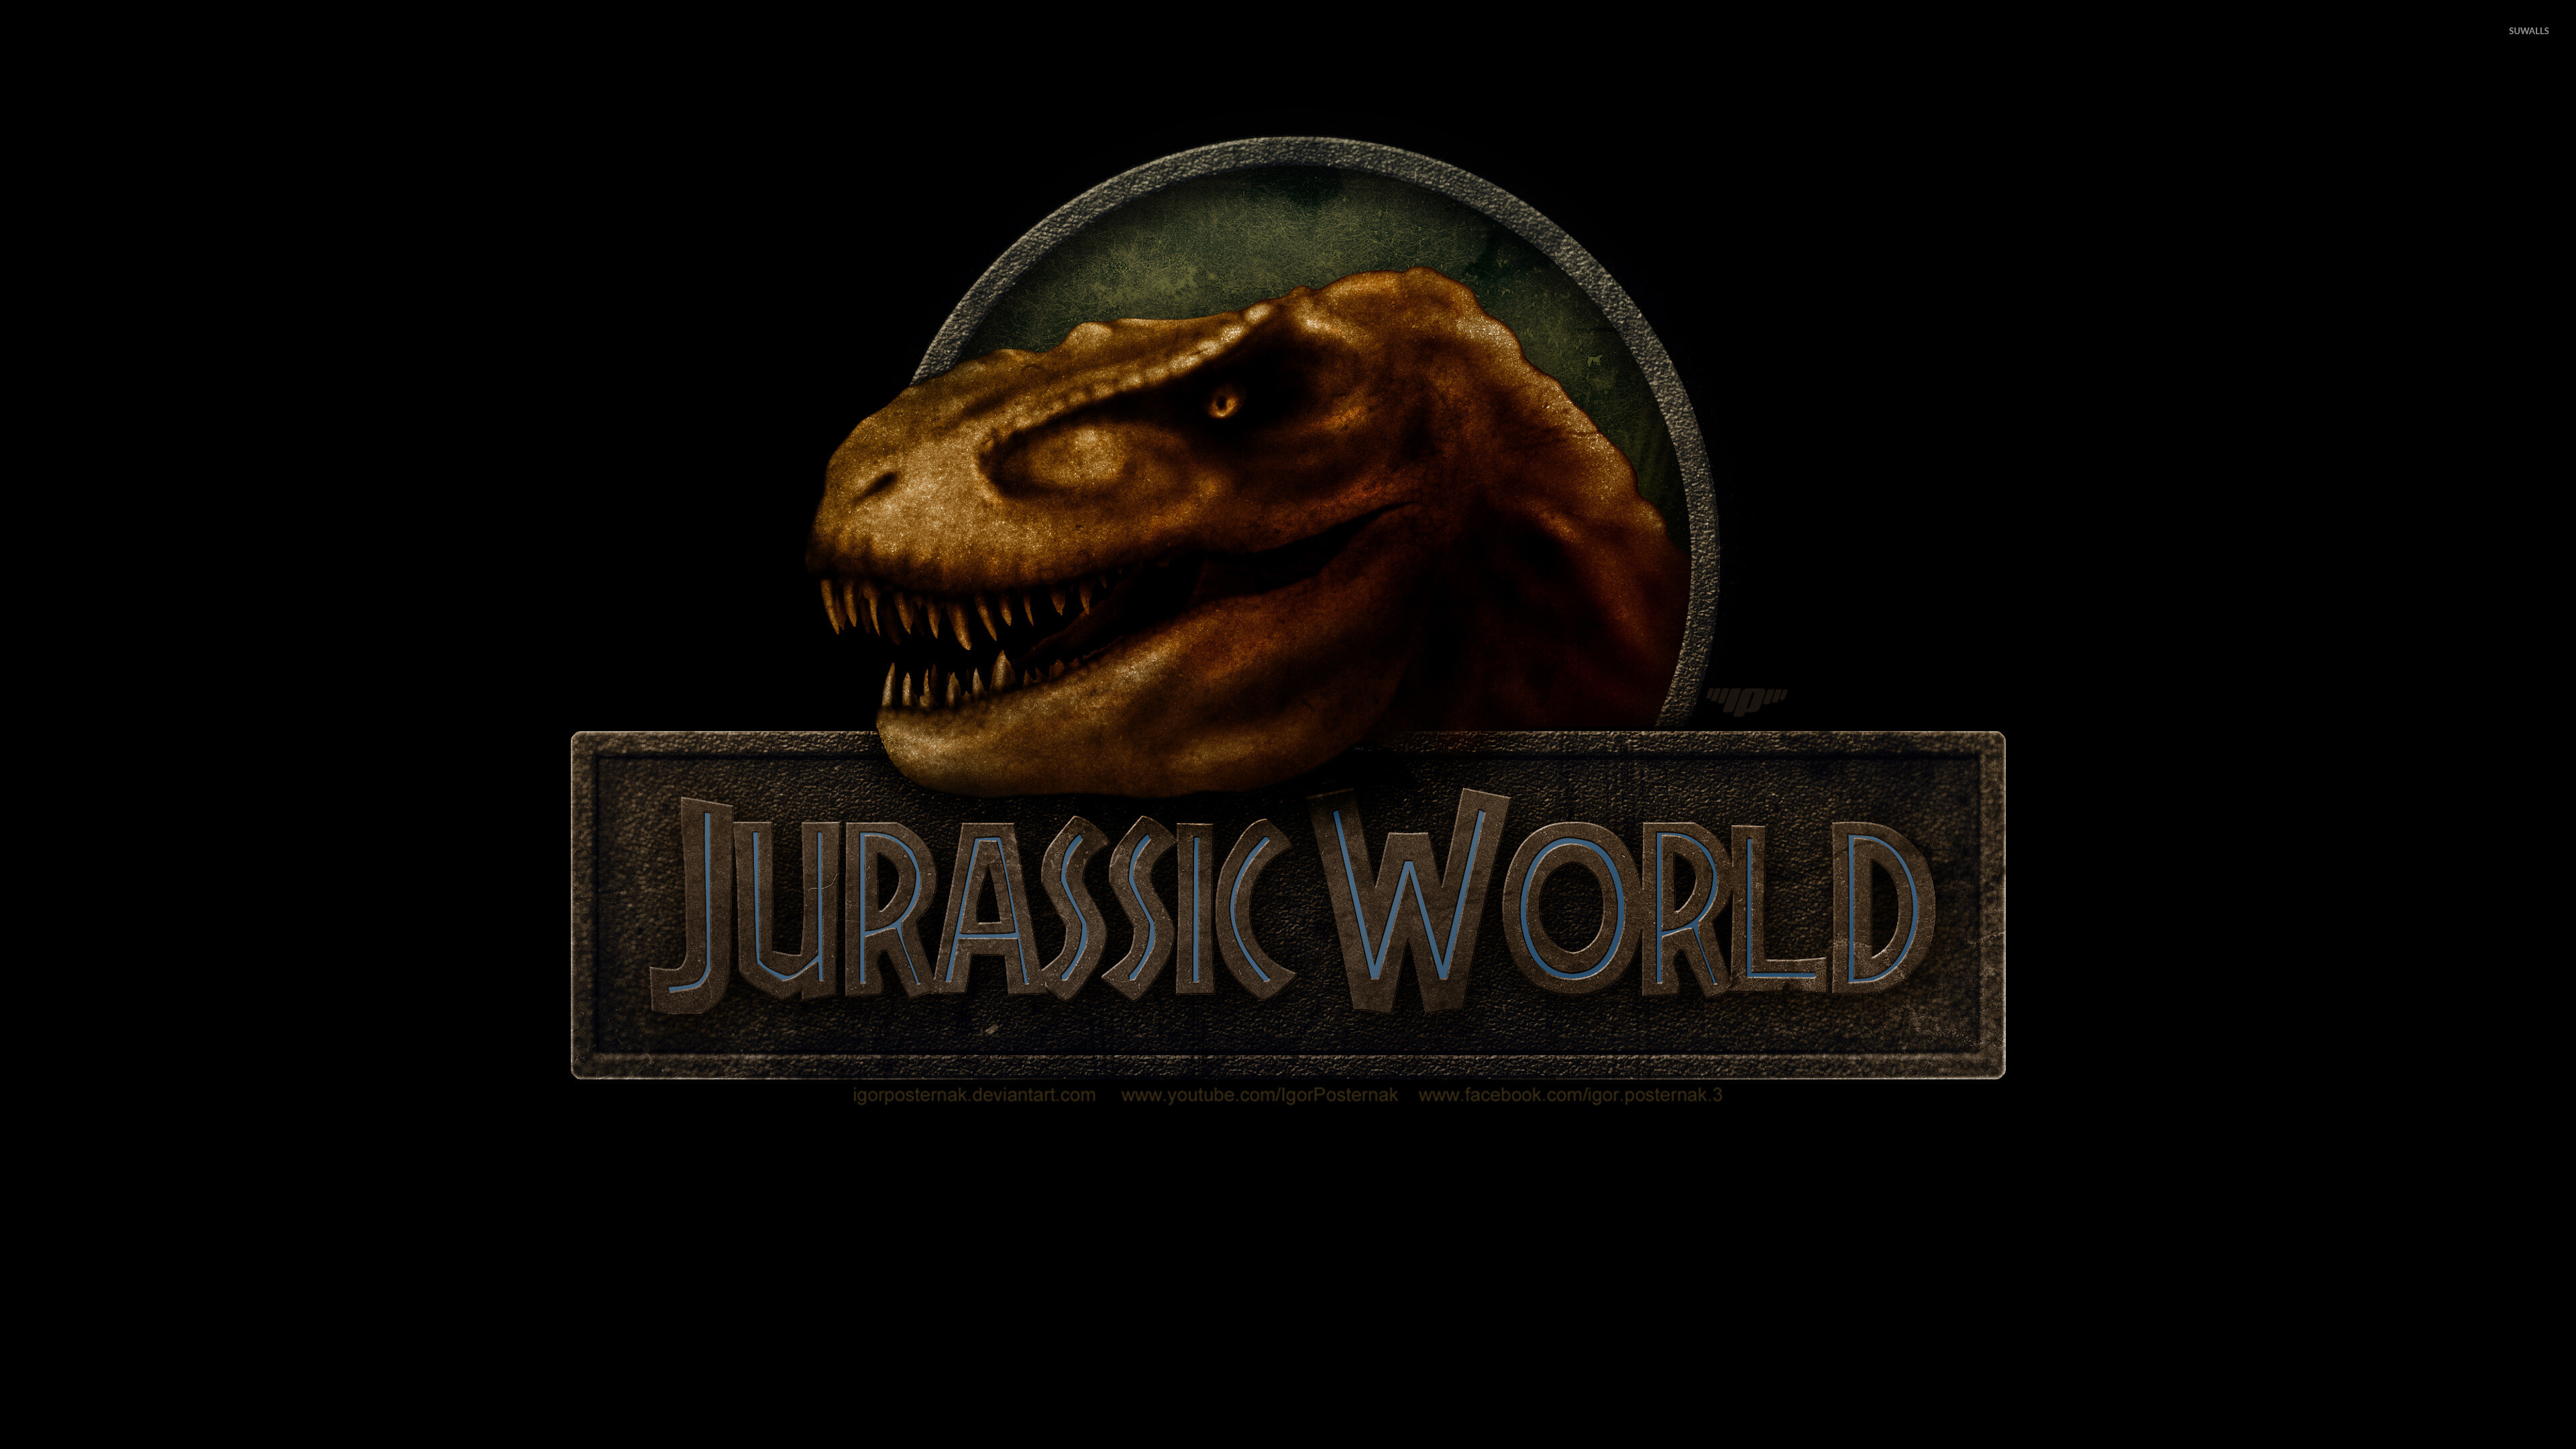 Jurassic World: A 2015 American science fiction action film directed by Colin Trevorrow. 3840x2160 4K Background.